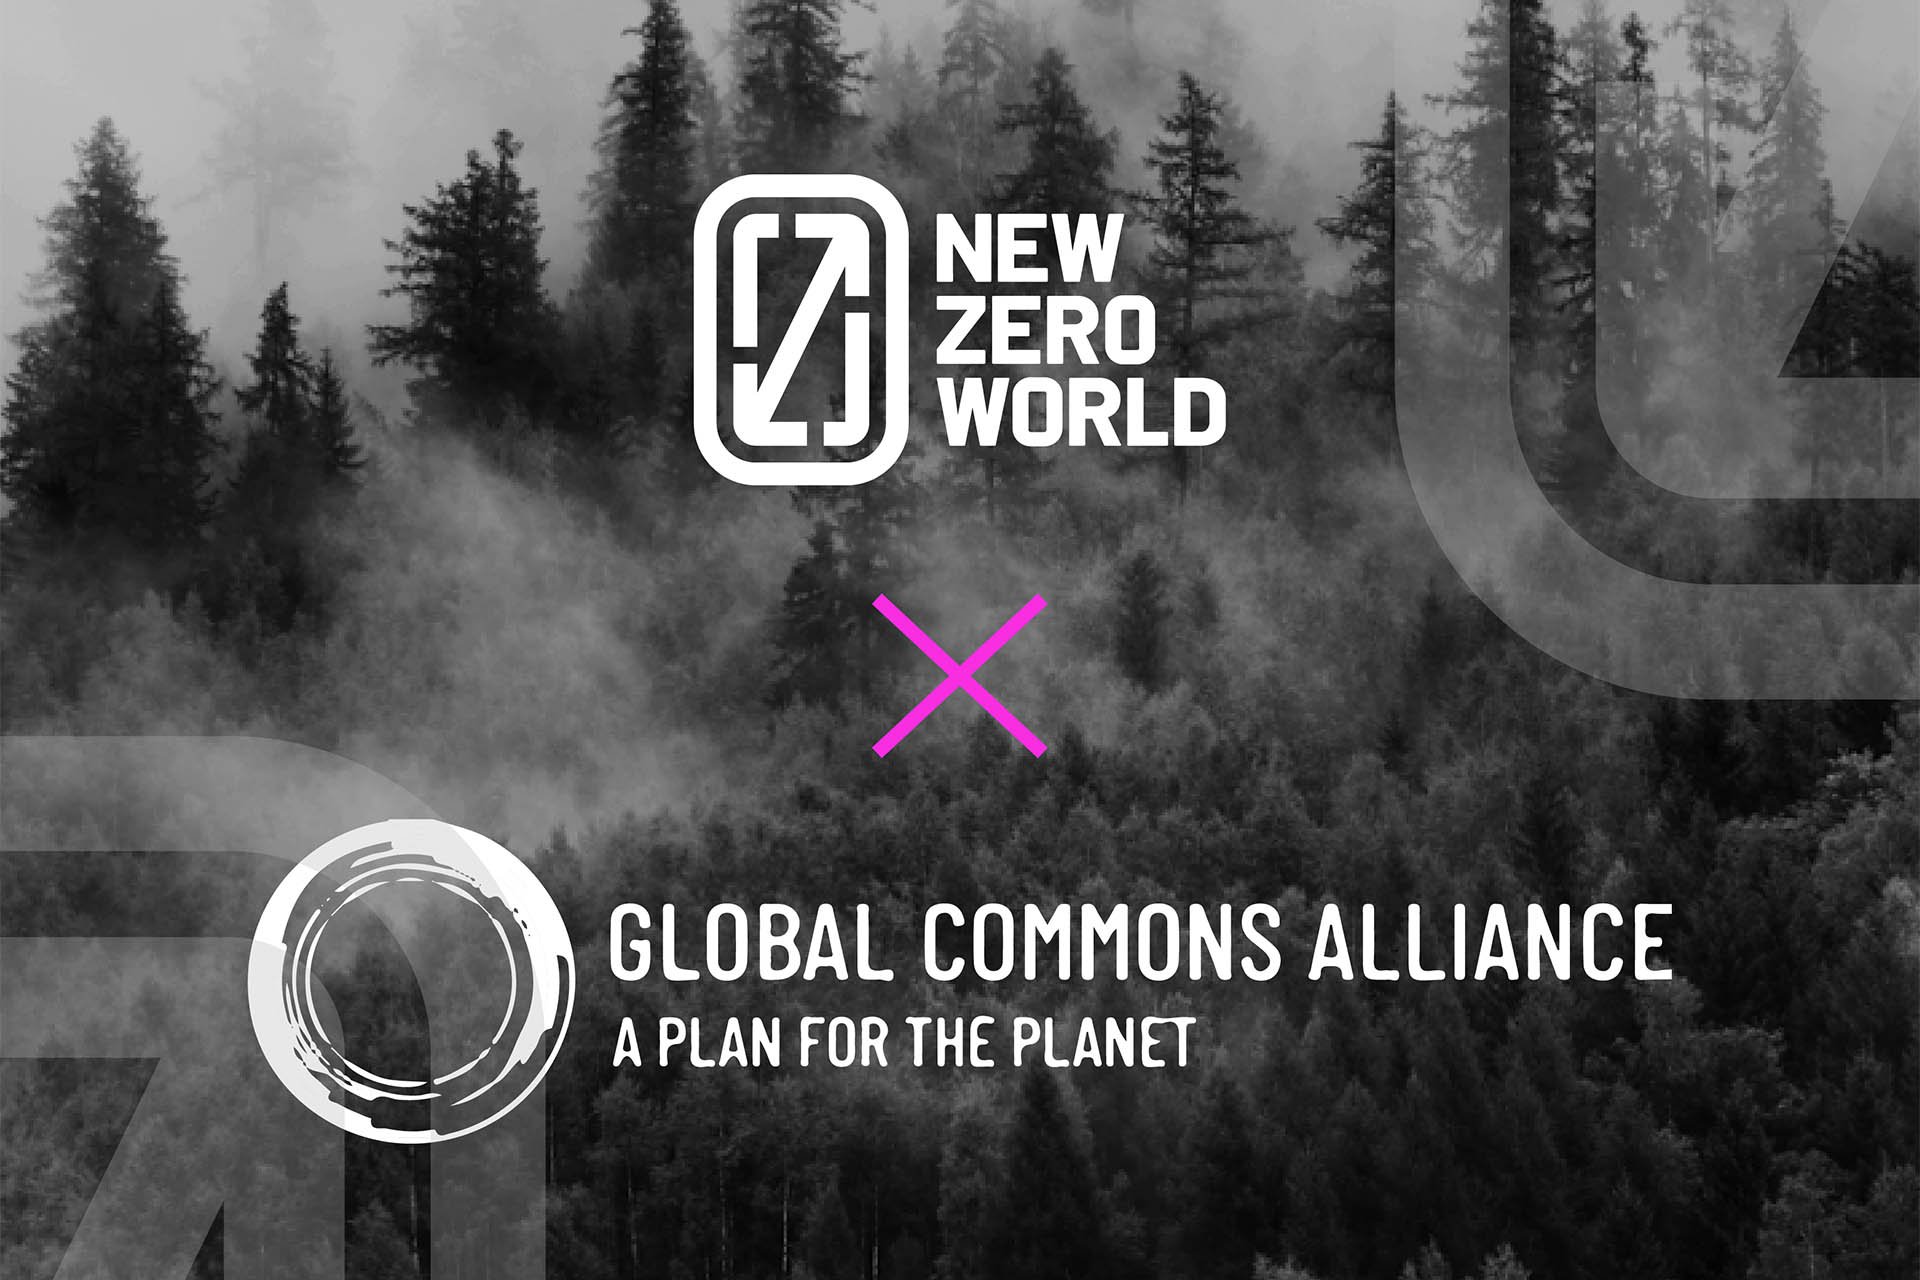 NZW JOINS GLOBAL COMMONS ALLIANCE